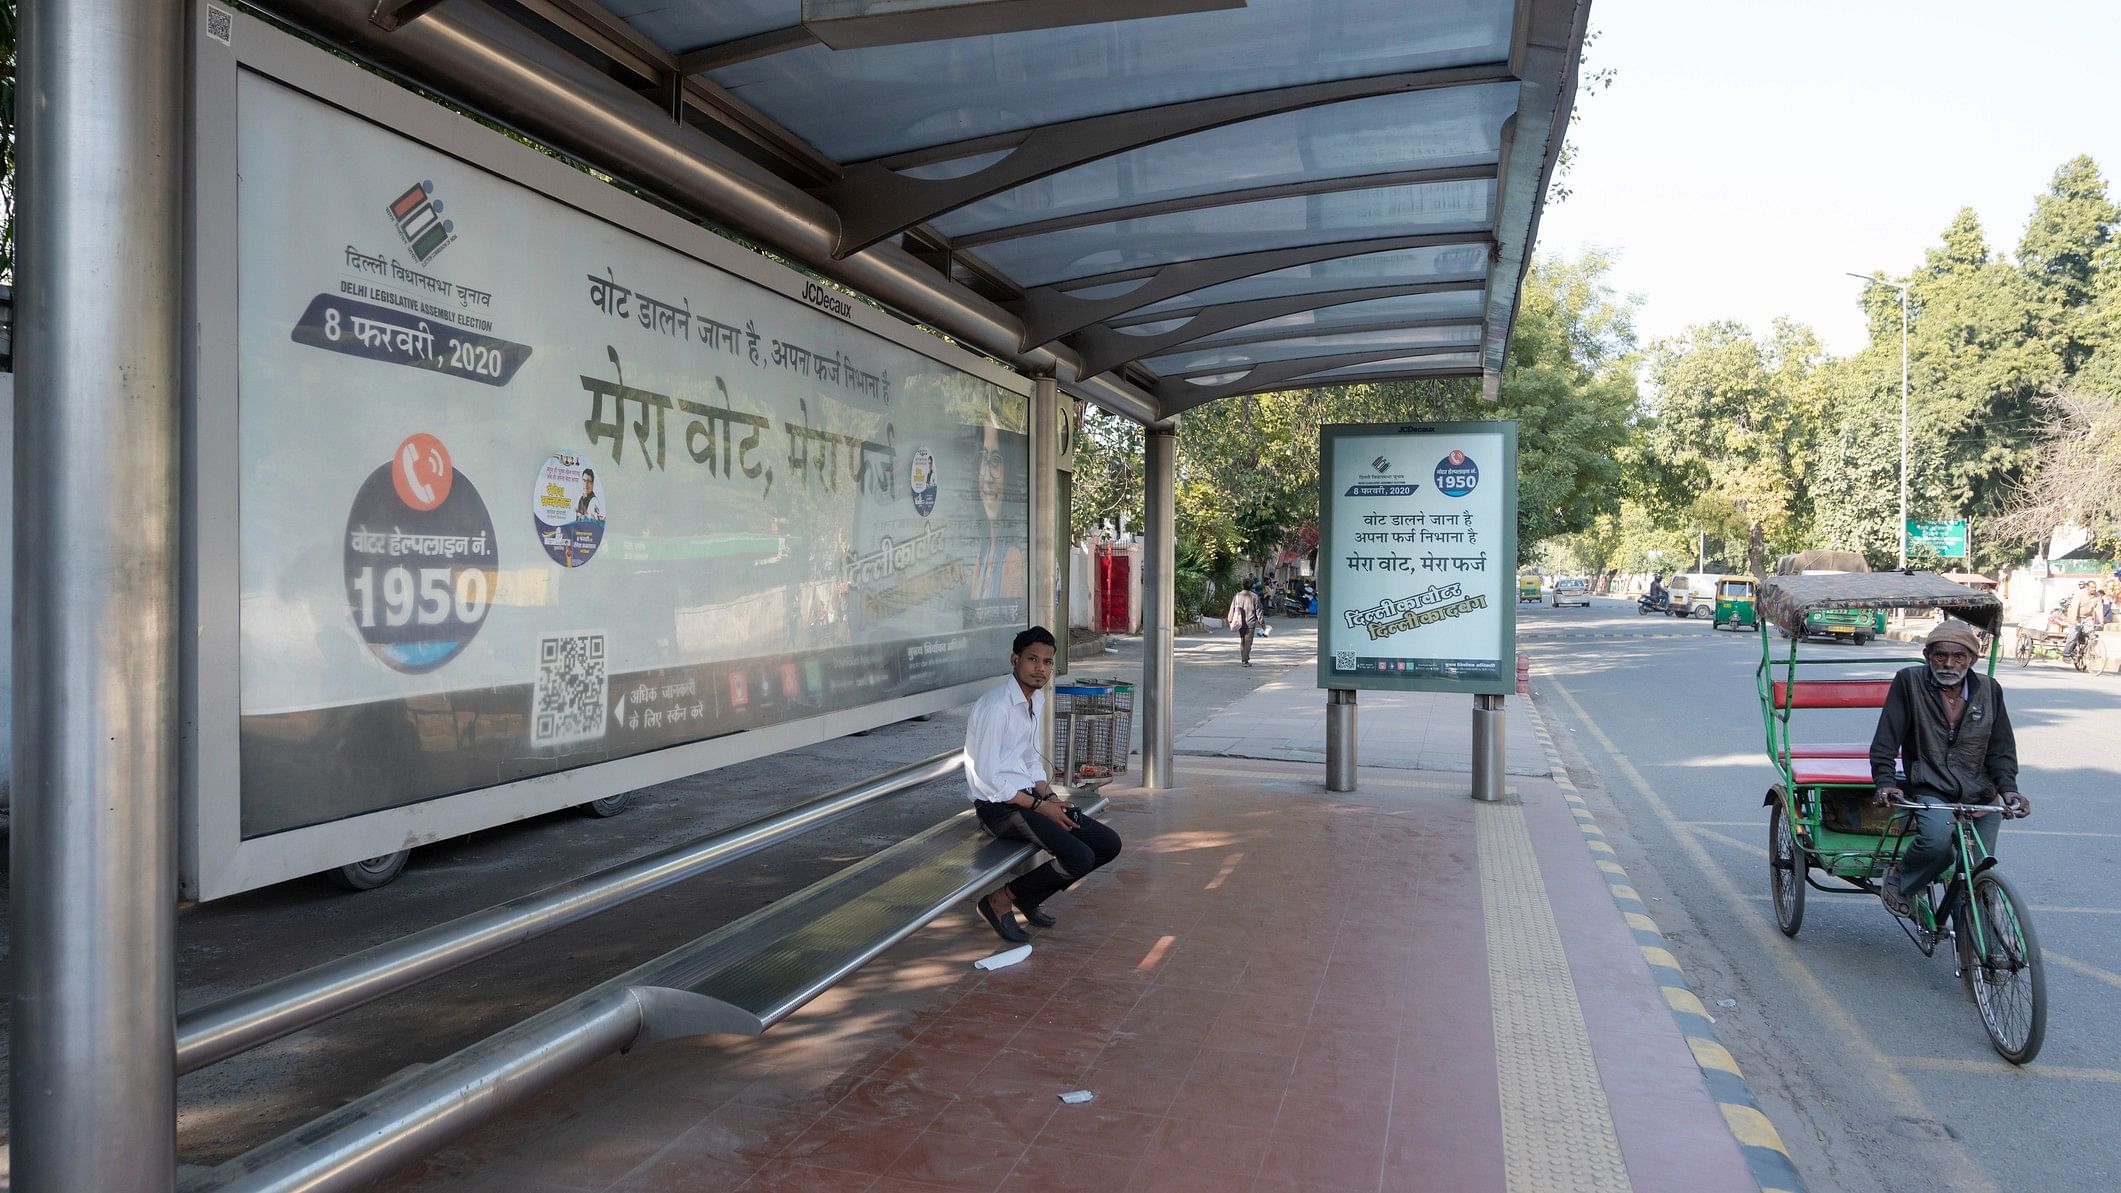 <div class="paragraphs"><p>Representative image showing a bus stand in India with an advertisement by the Election Commission, urging people to vote.</p></div>